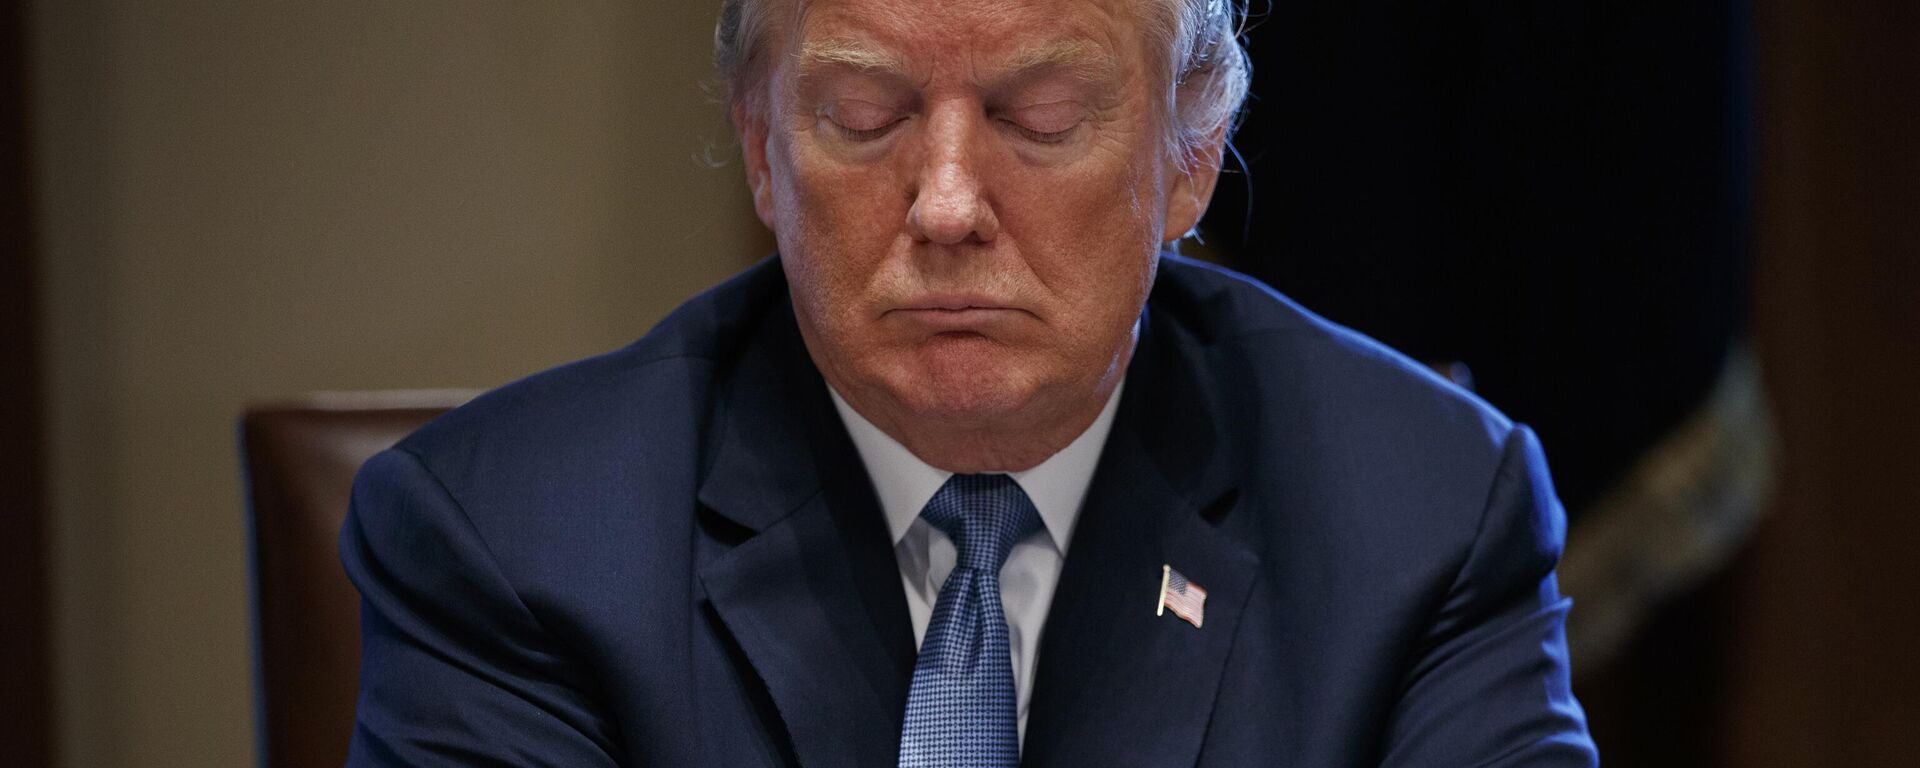 In this June 26, 2018 photo, President Donald Trump listens during a meeting with Republican lawmakers in the Cabinet Room of the White House in Washington - Sputnik International, 1920, 16.02.2024